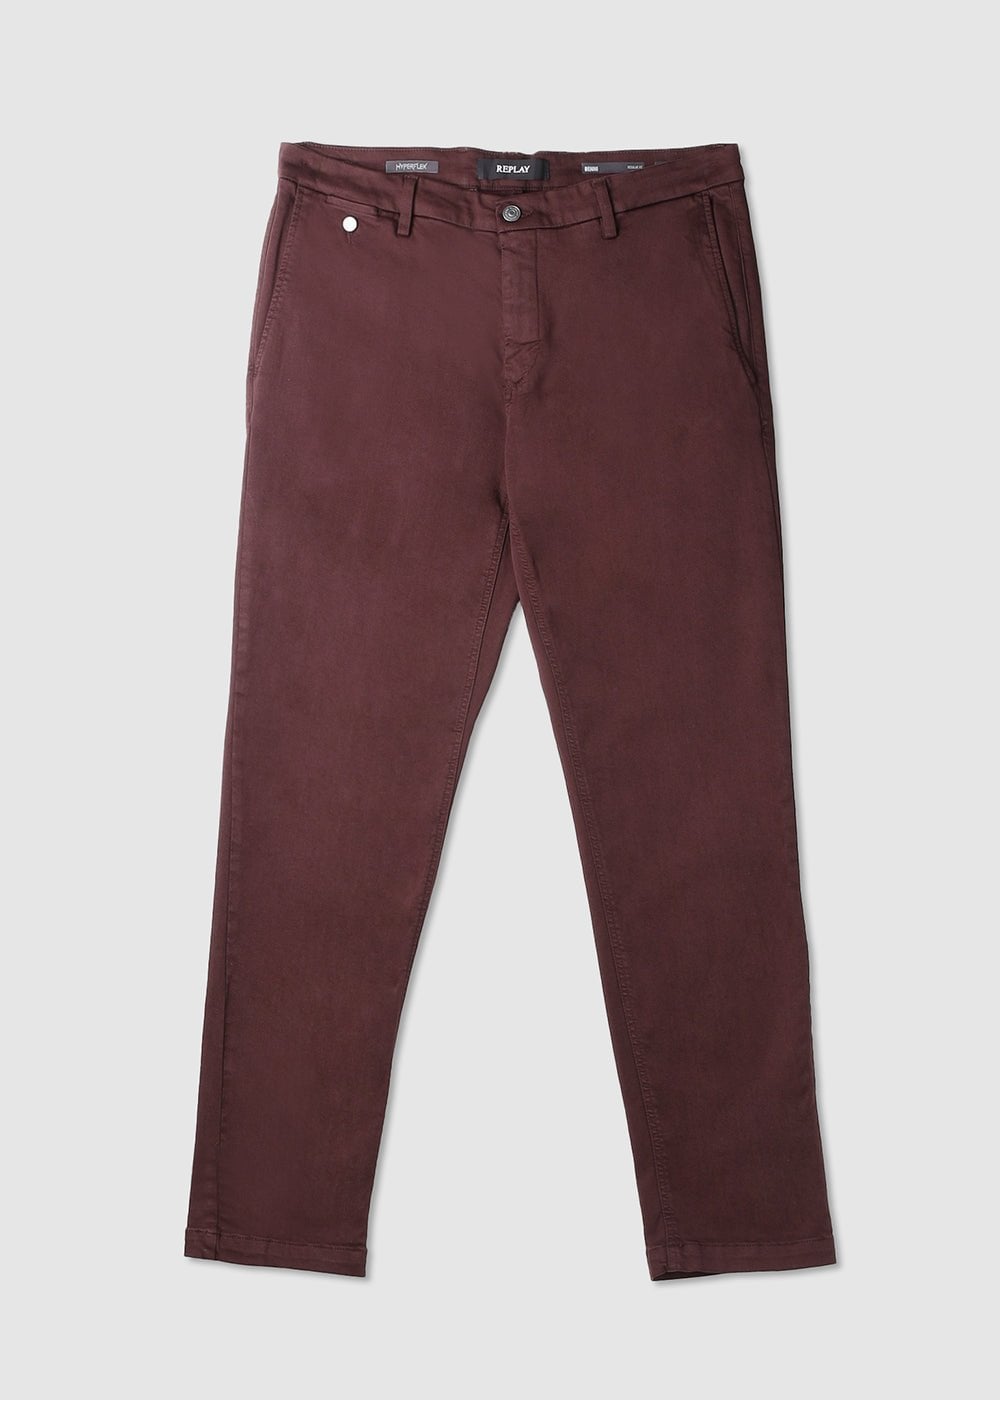 Replay Mens Benni Chino Hyperflex X-lite Trousers In Old Wine